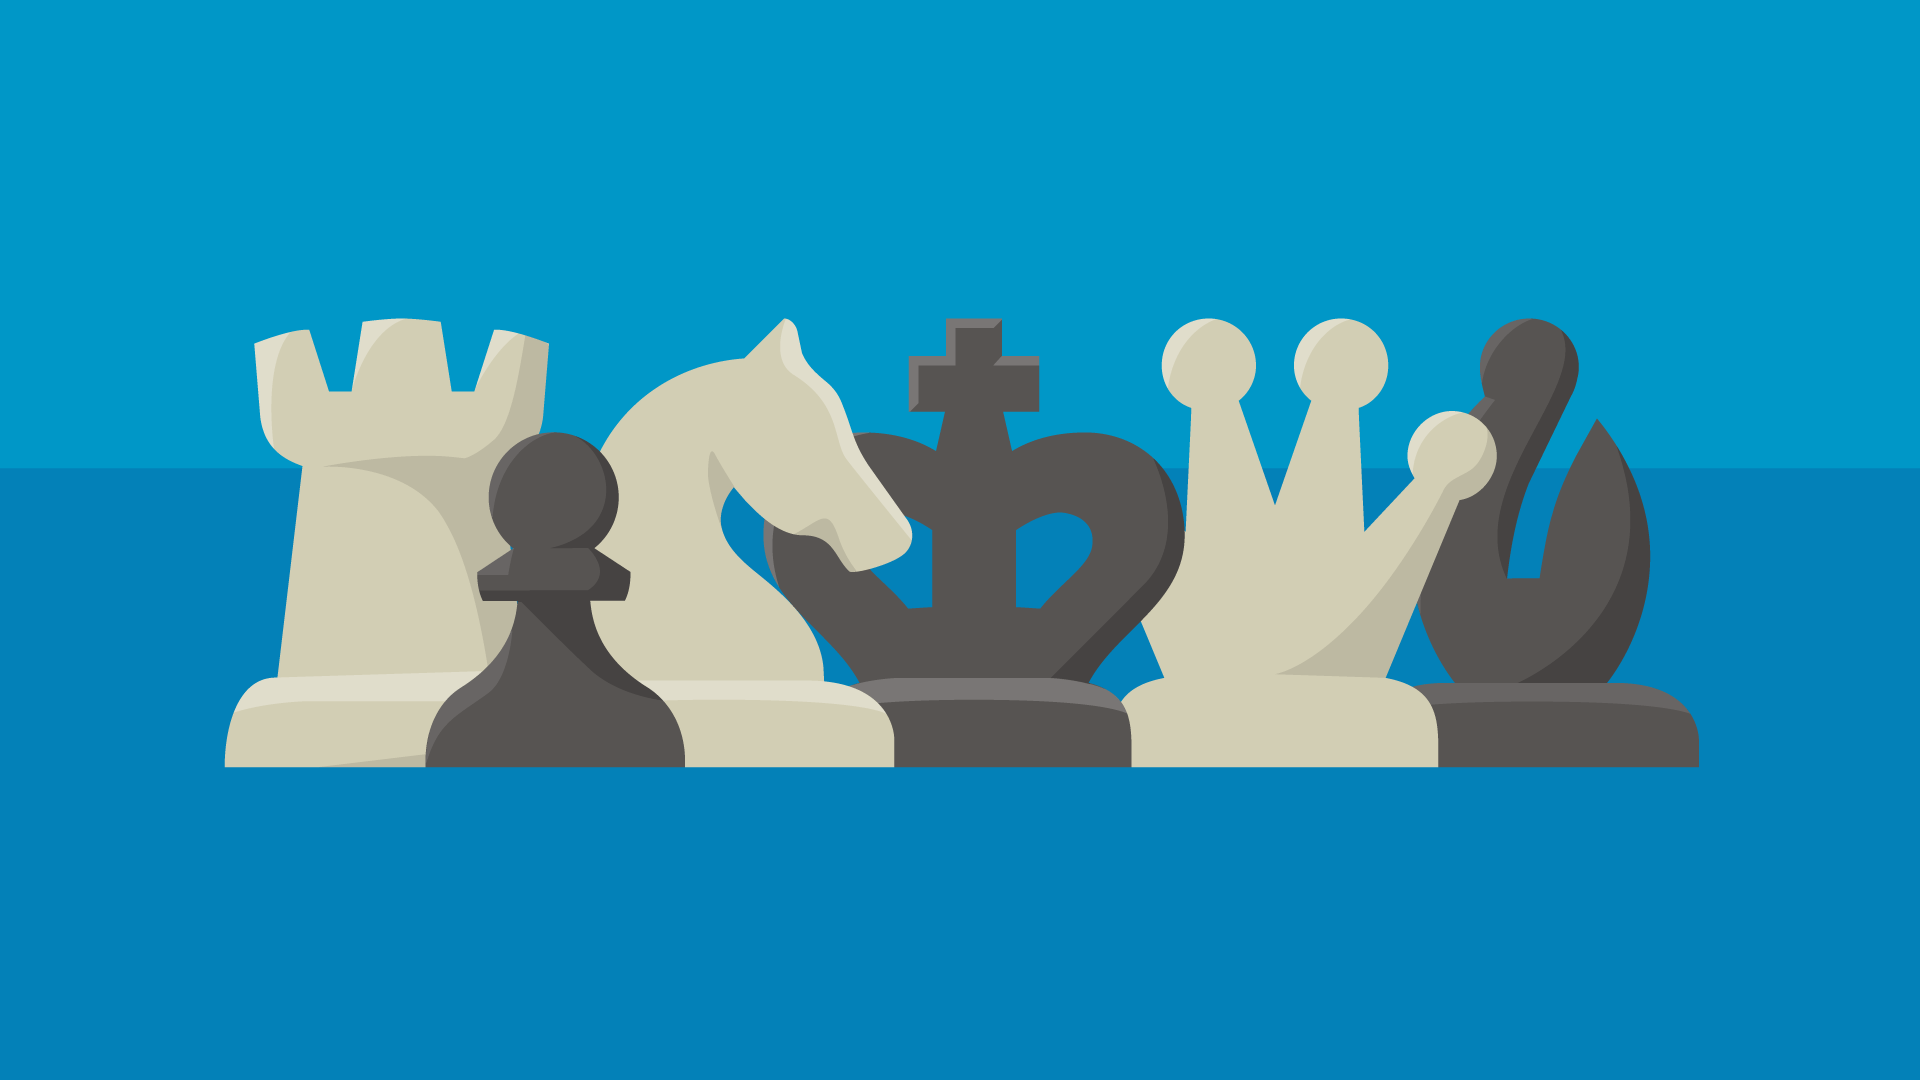 3 white and 3 black chess pieces against a blue background